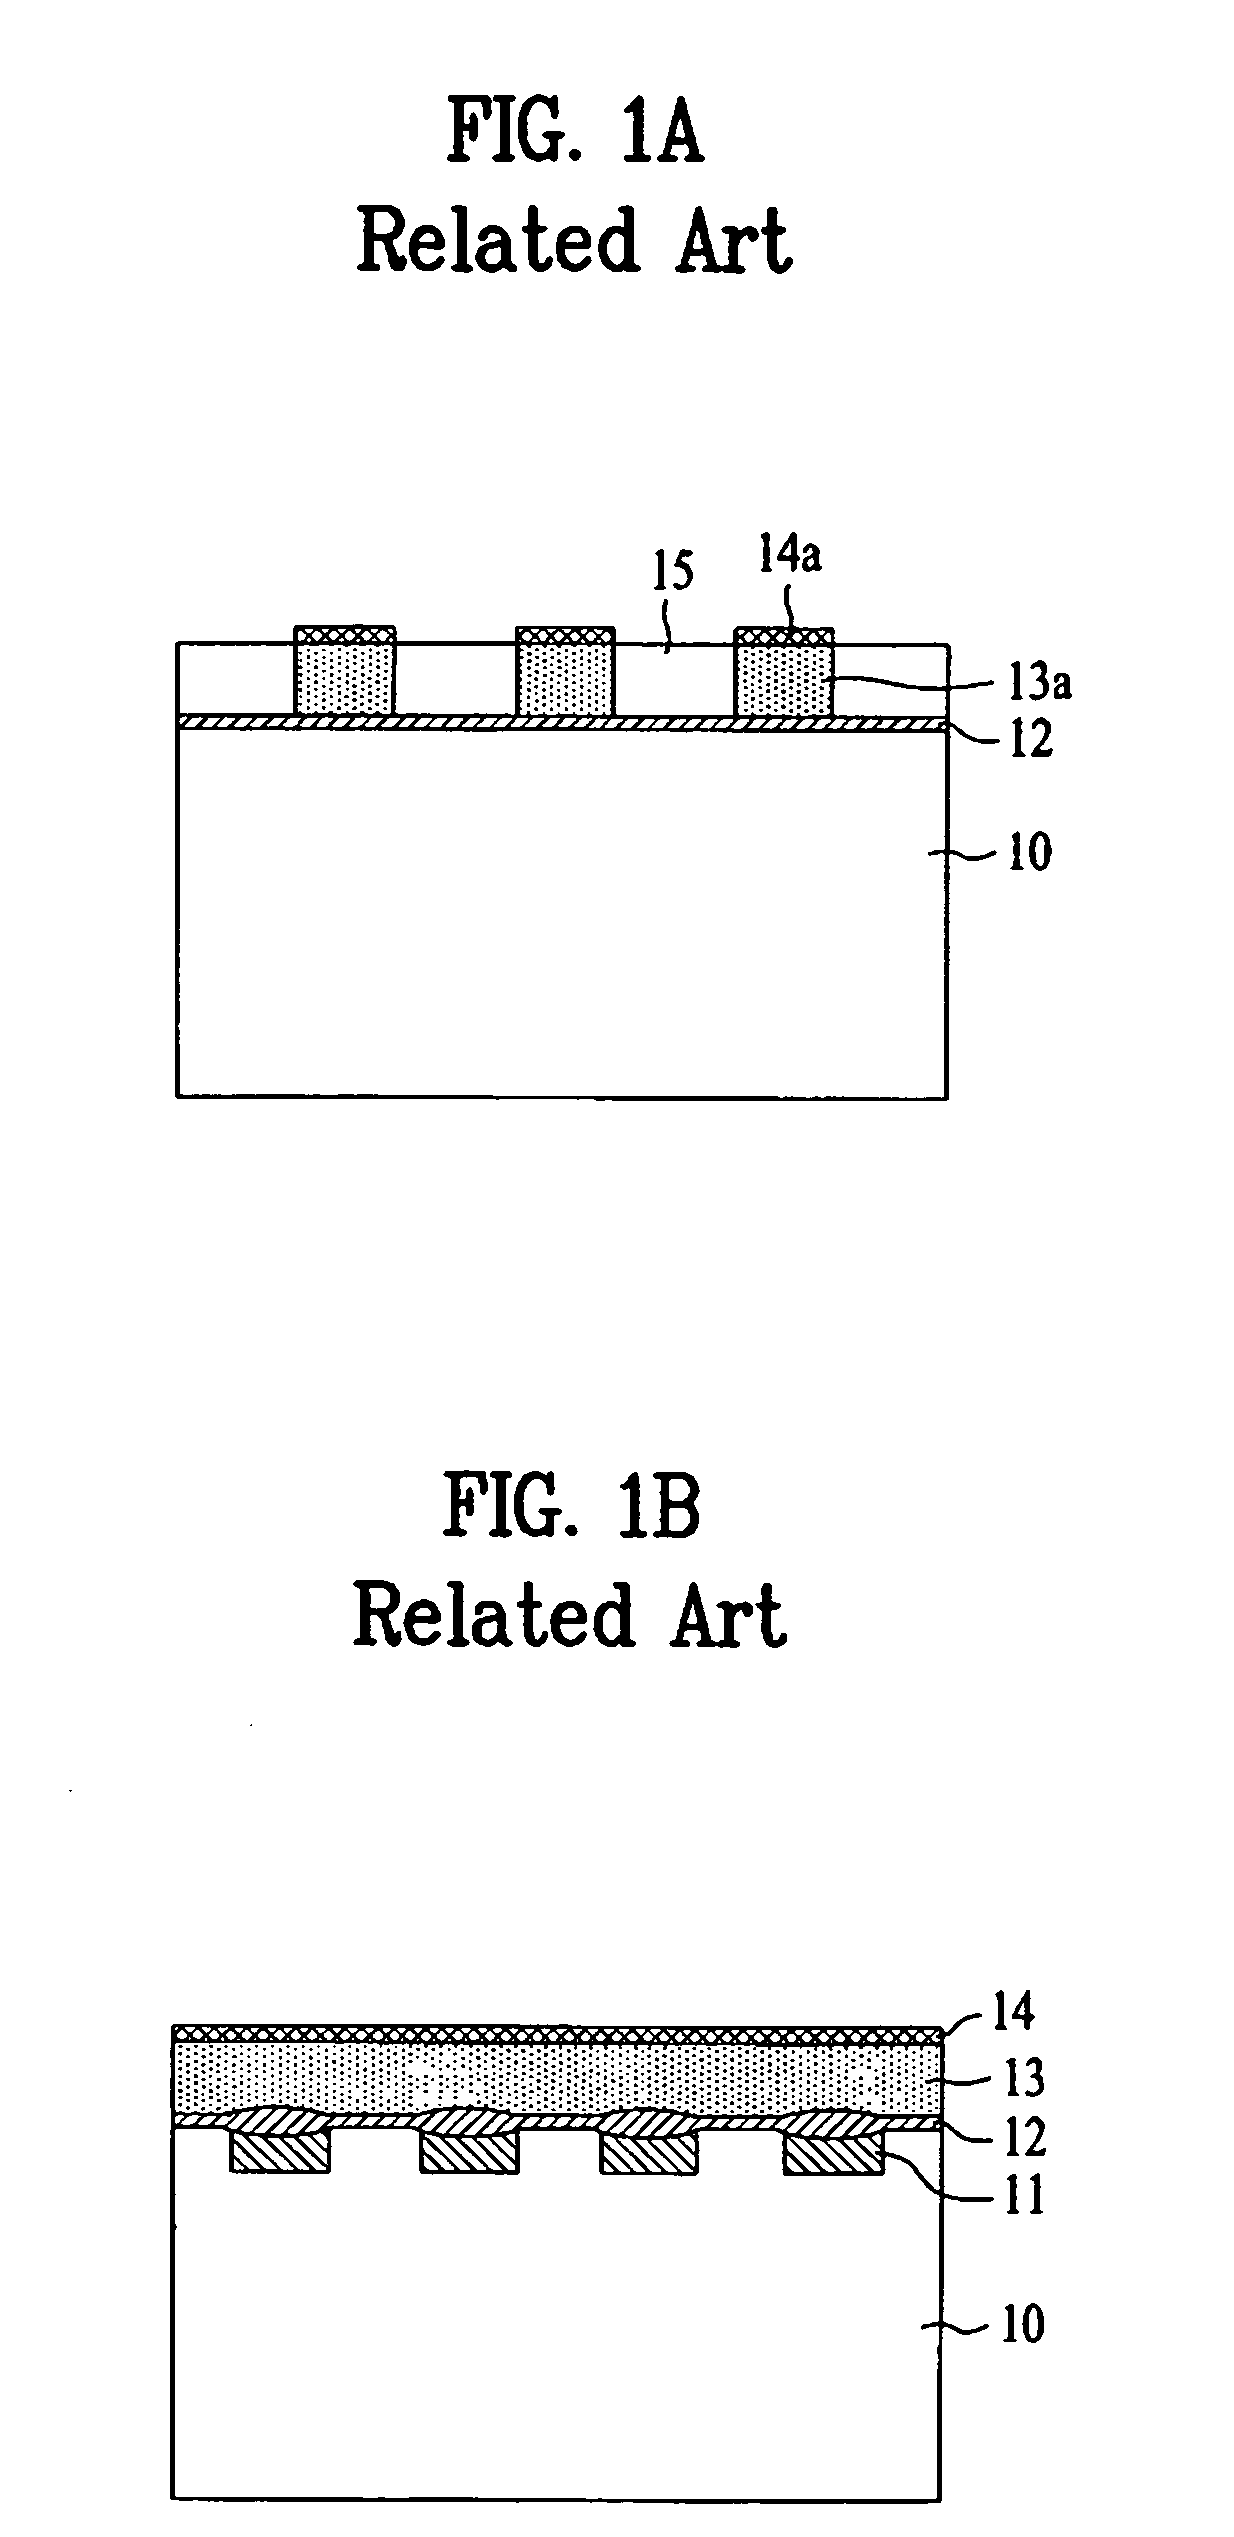 Mask ROM, method for fabricating the same, and method for coding the same